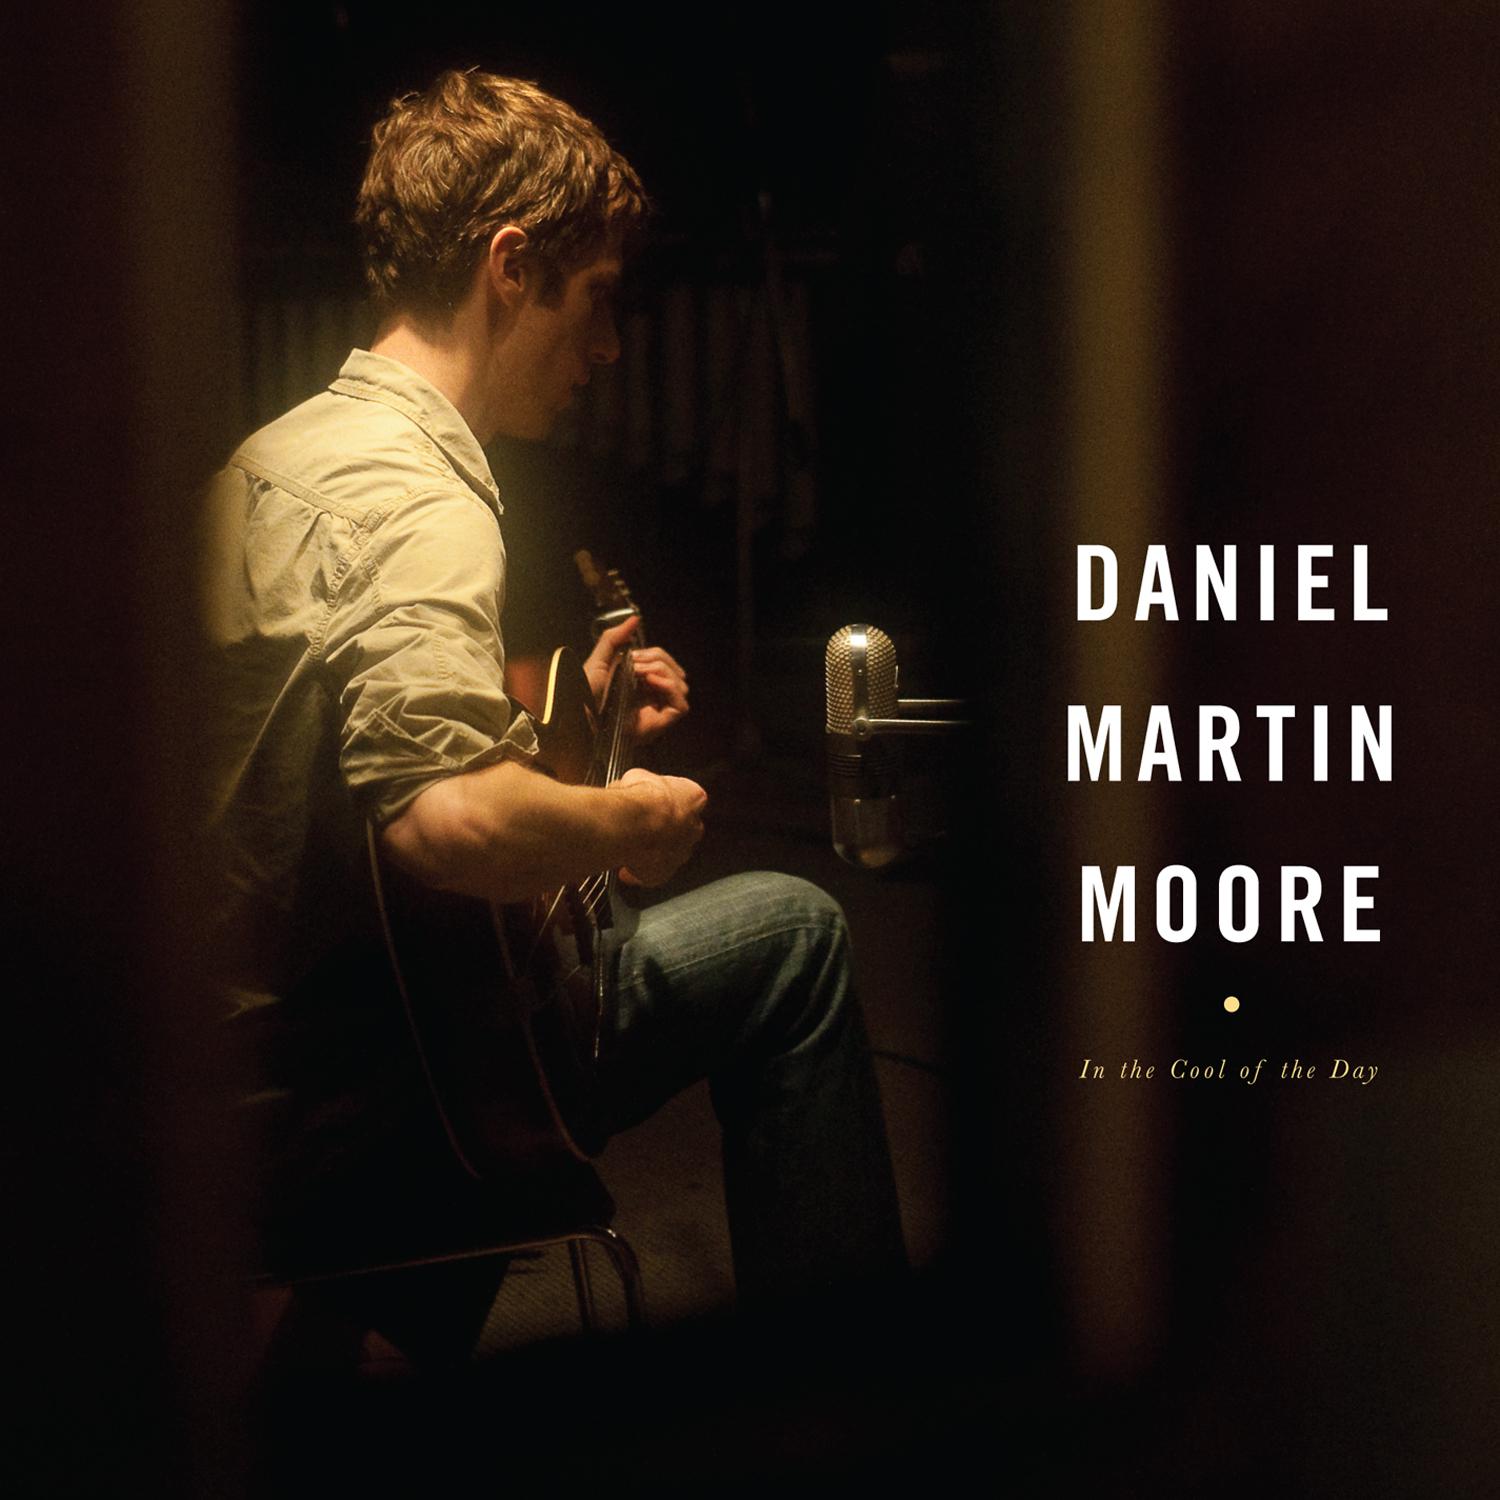 Daniel Martin Moore - Closer Walk With Thee